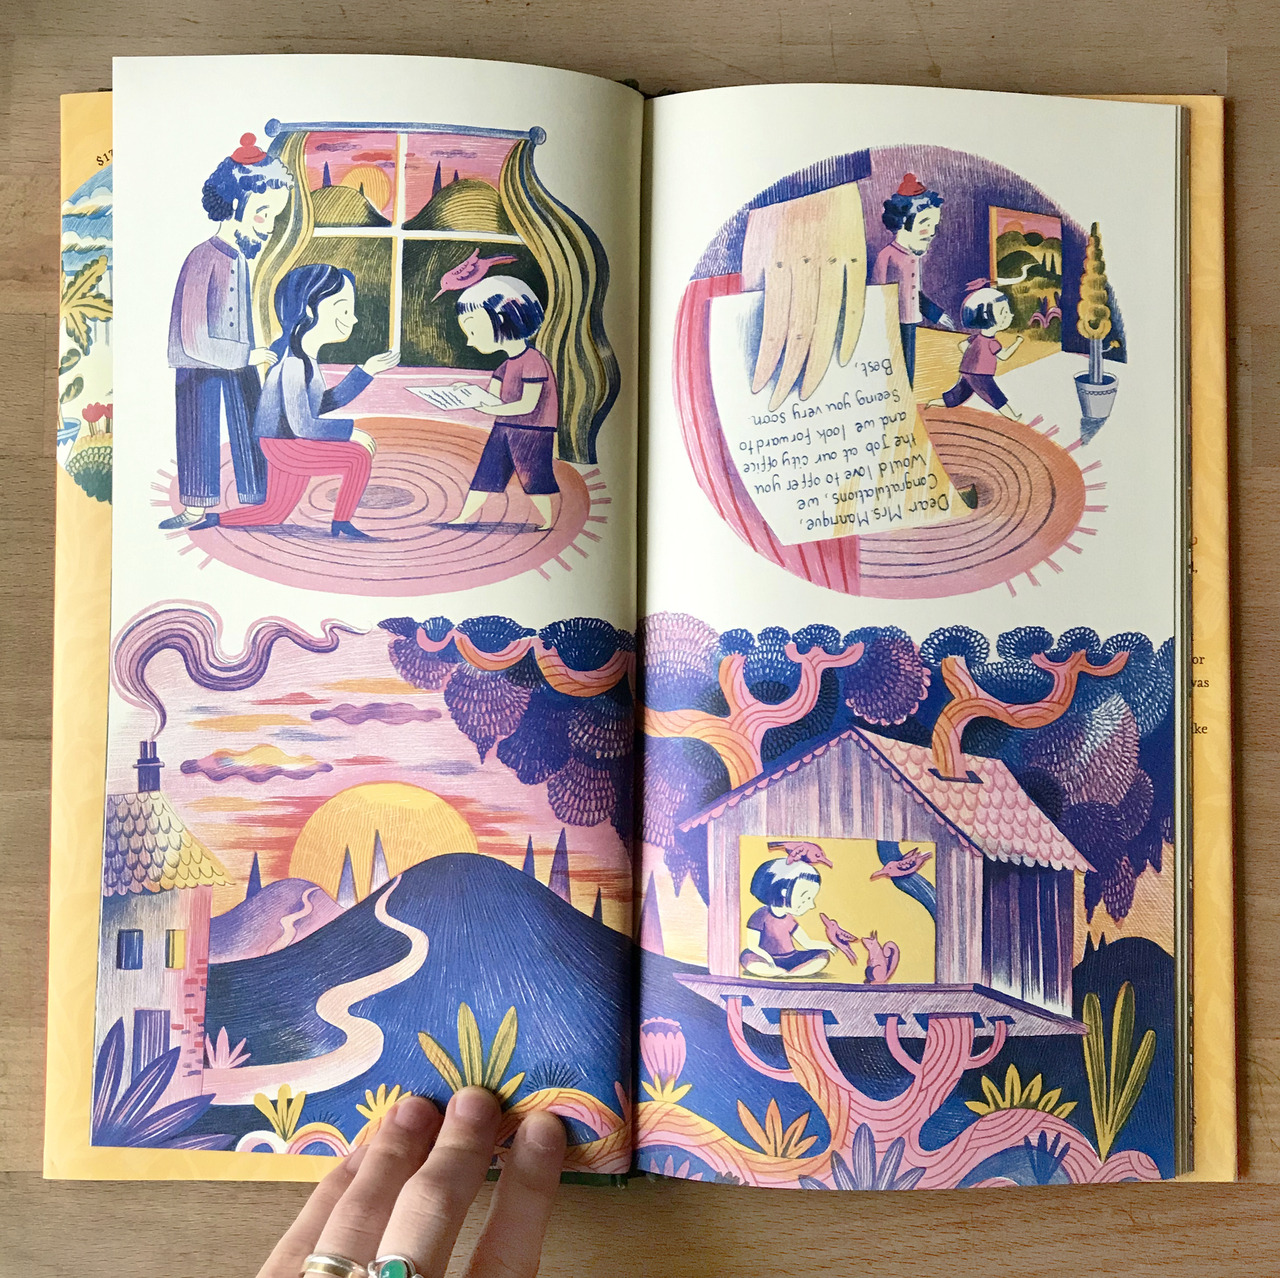 Spread from my wordless book ‘The balcony’ out now! published by Paula Wiseman books/Simon & Schuster.